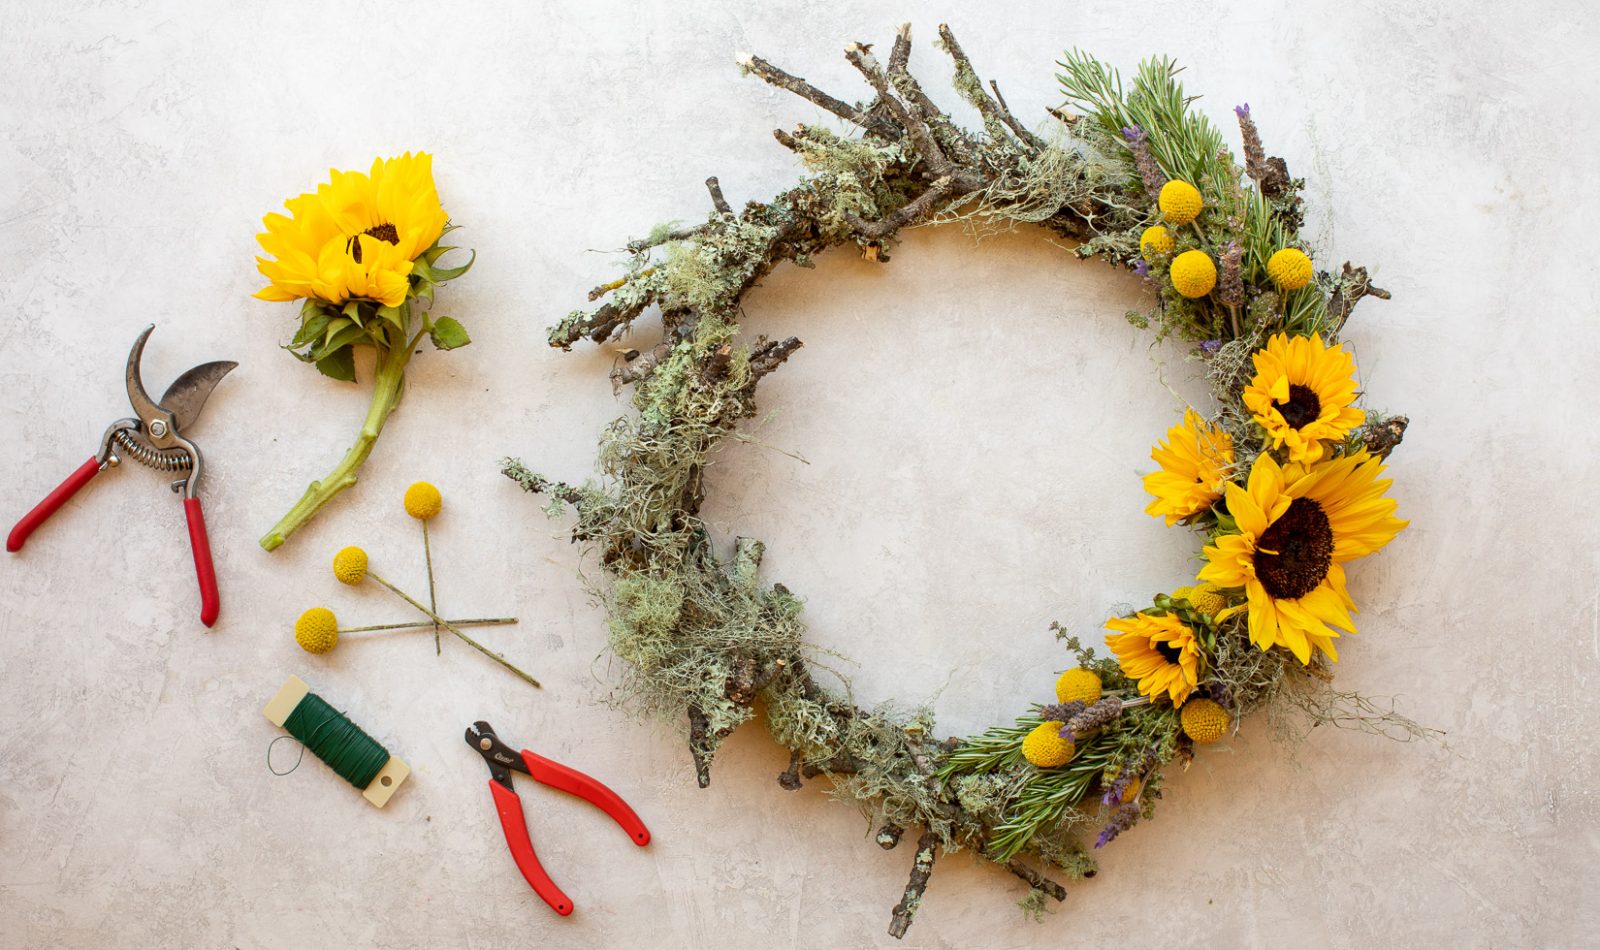 summer Oak wreath with moss and sunflowers next to gardening sheers, a sunflower, thread and billy balls